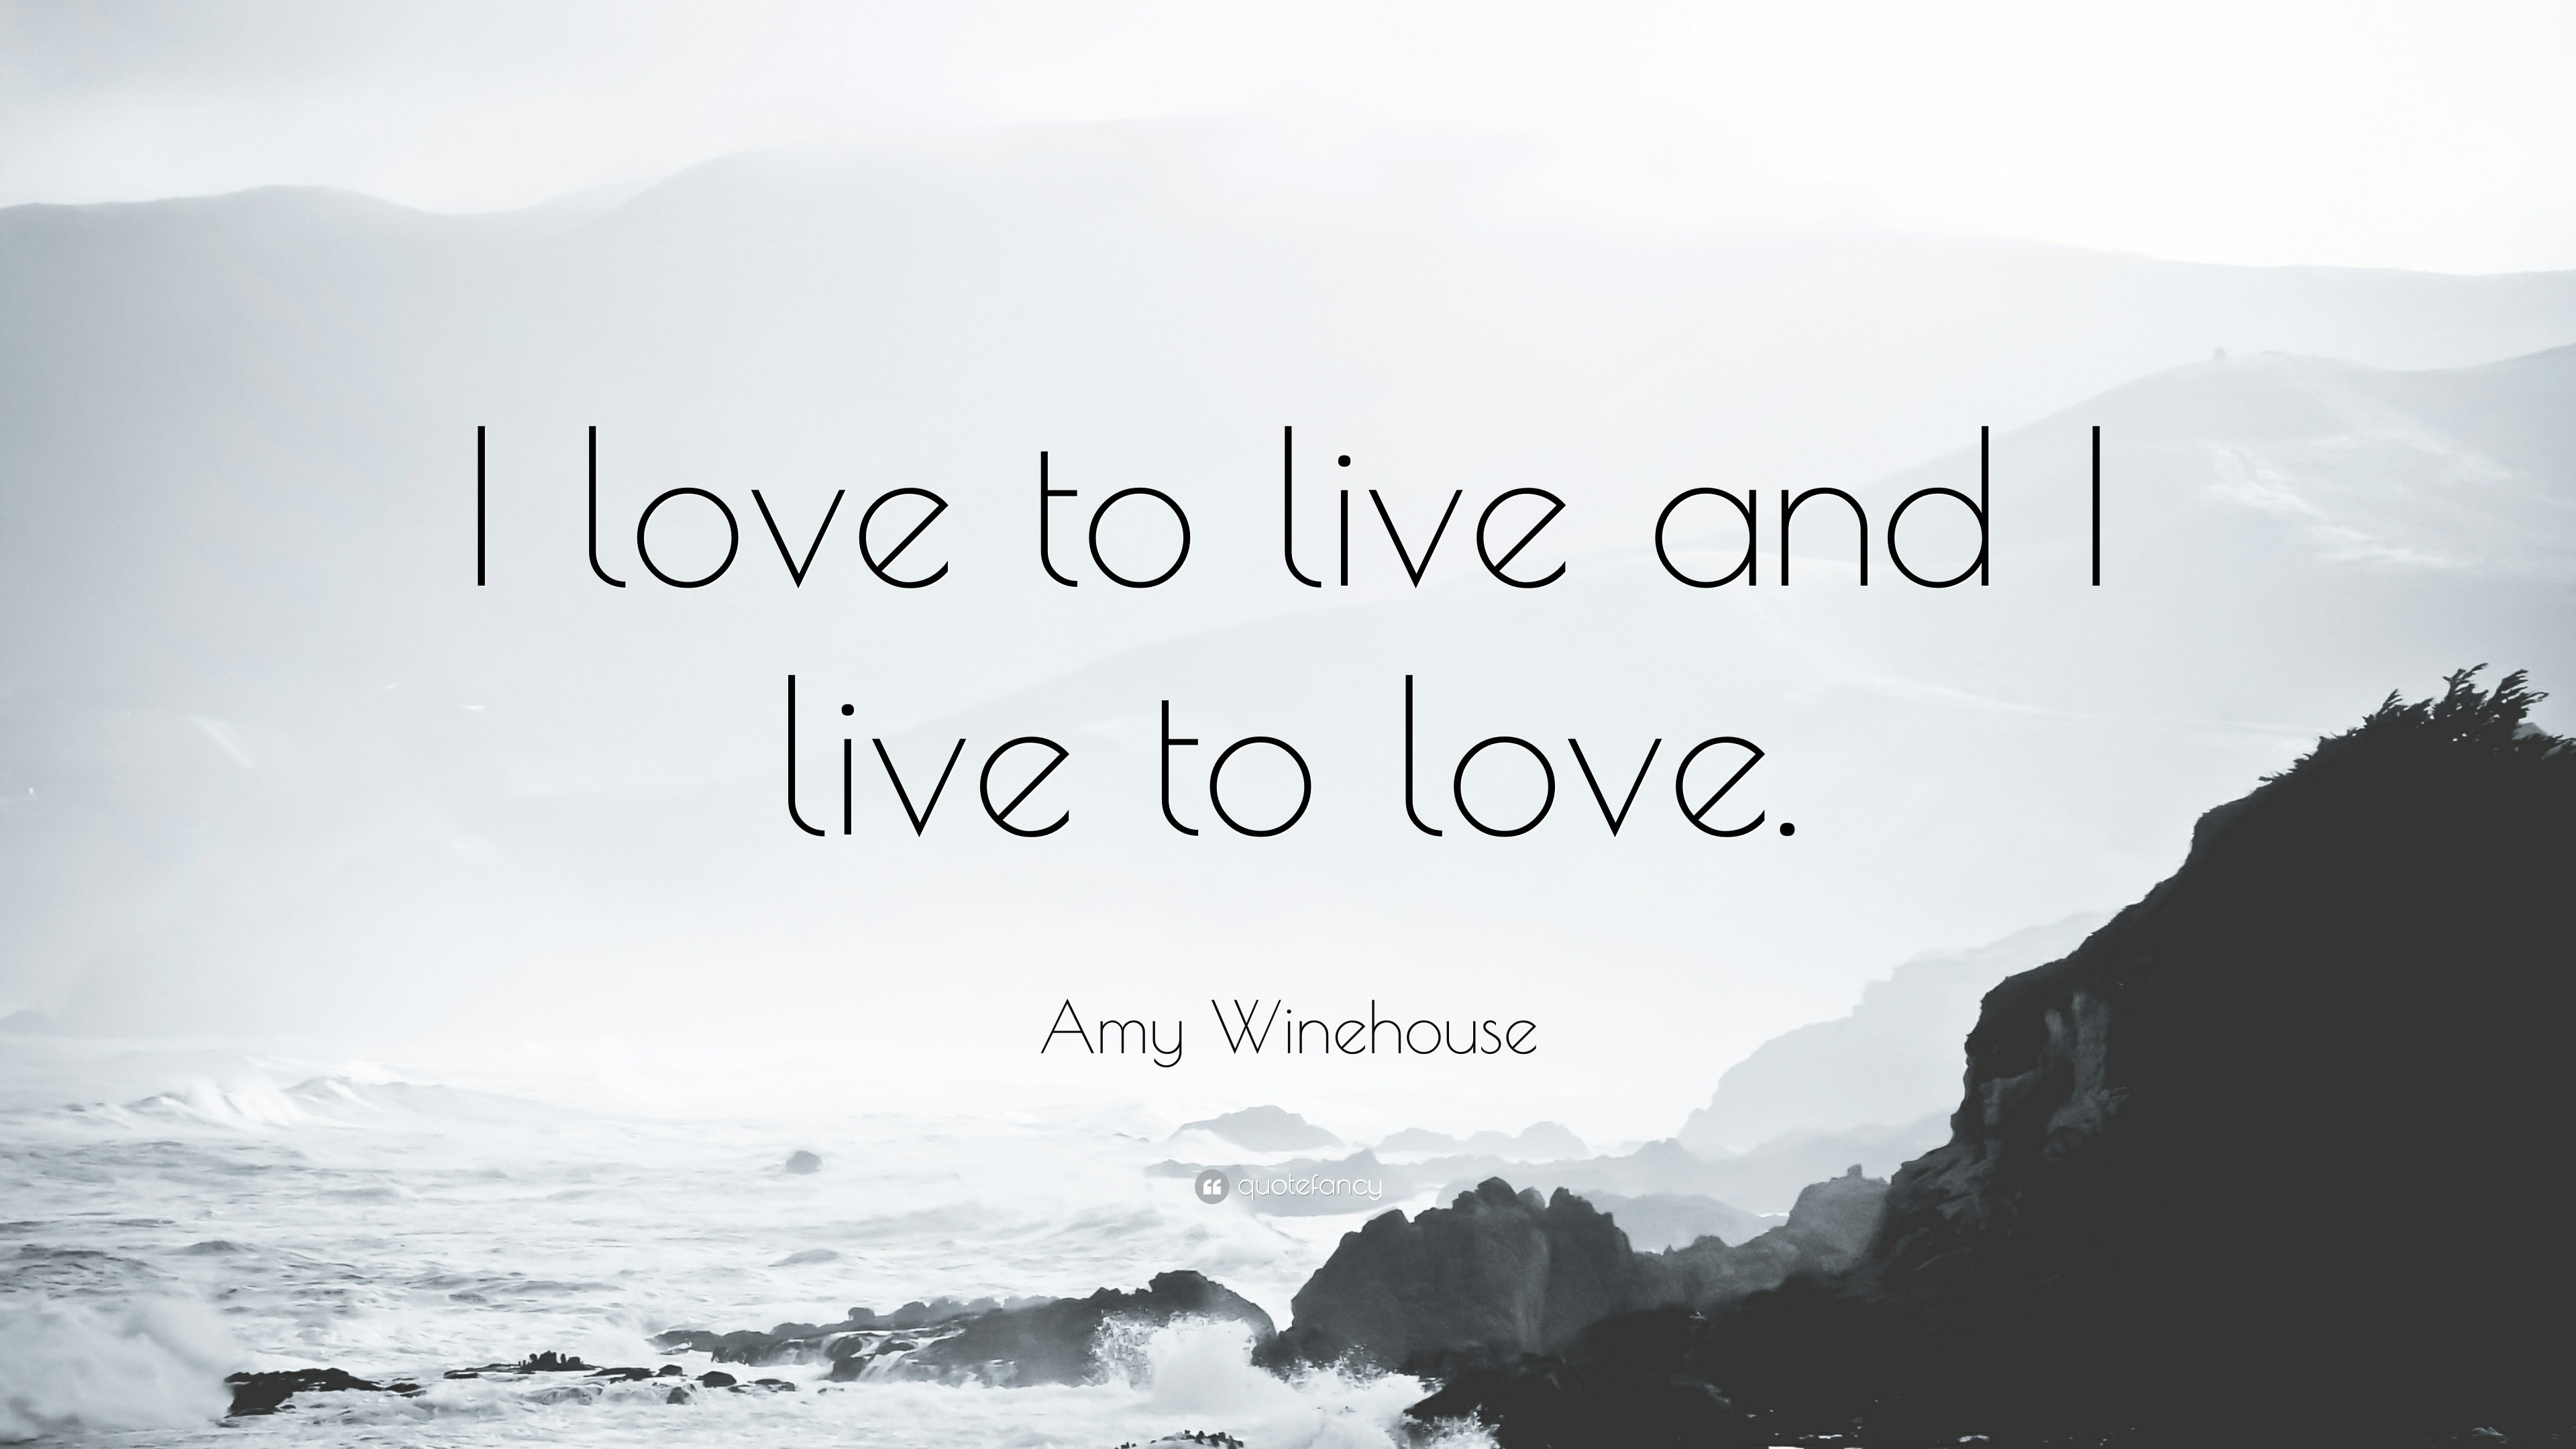 3840x2160 Amy Winehouse Quote: “I love to live and I live to love.”